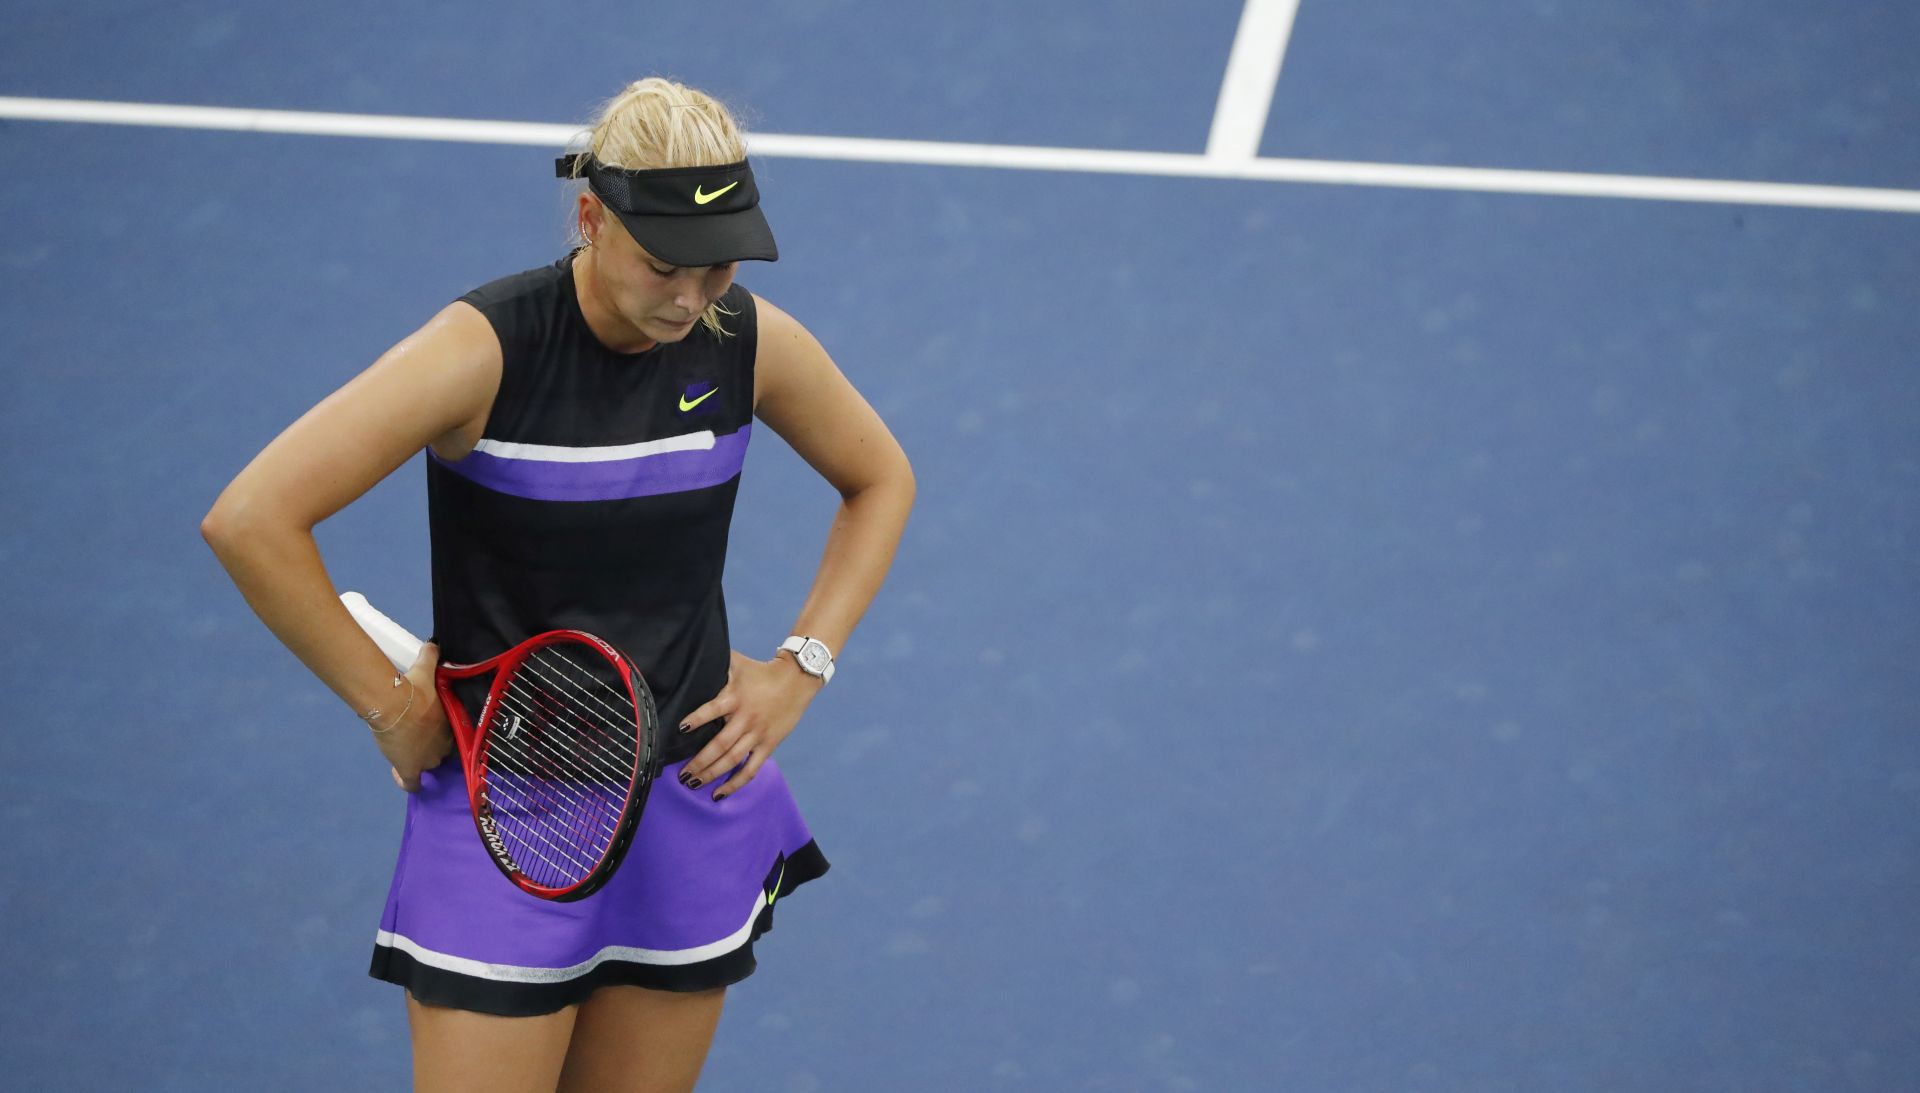 epa07813258 Donna Vekic of Crotia reacts as she plays Julia Goerges of Germany during their match on the eighth day of the US Open Tennis Championships the USTA National Tennis Center in Flushing Meadows, New York, USA, 02 September 2019. The US Open runs from 26 August through 08 September.  EPA/JUSTIN LANE